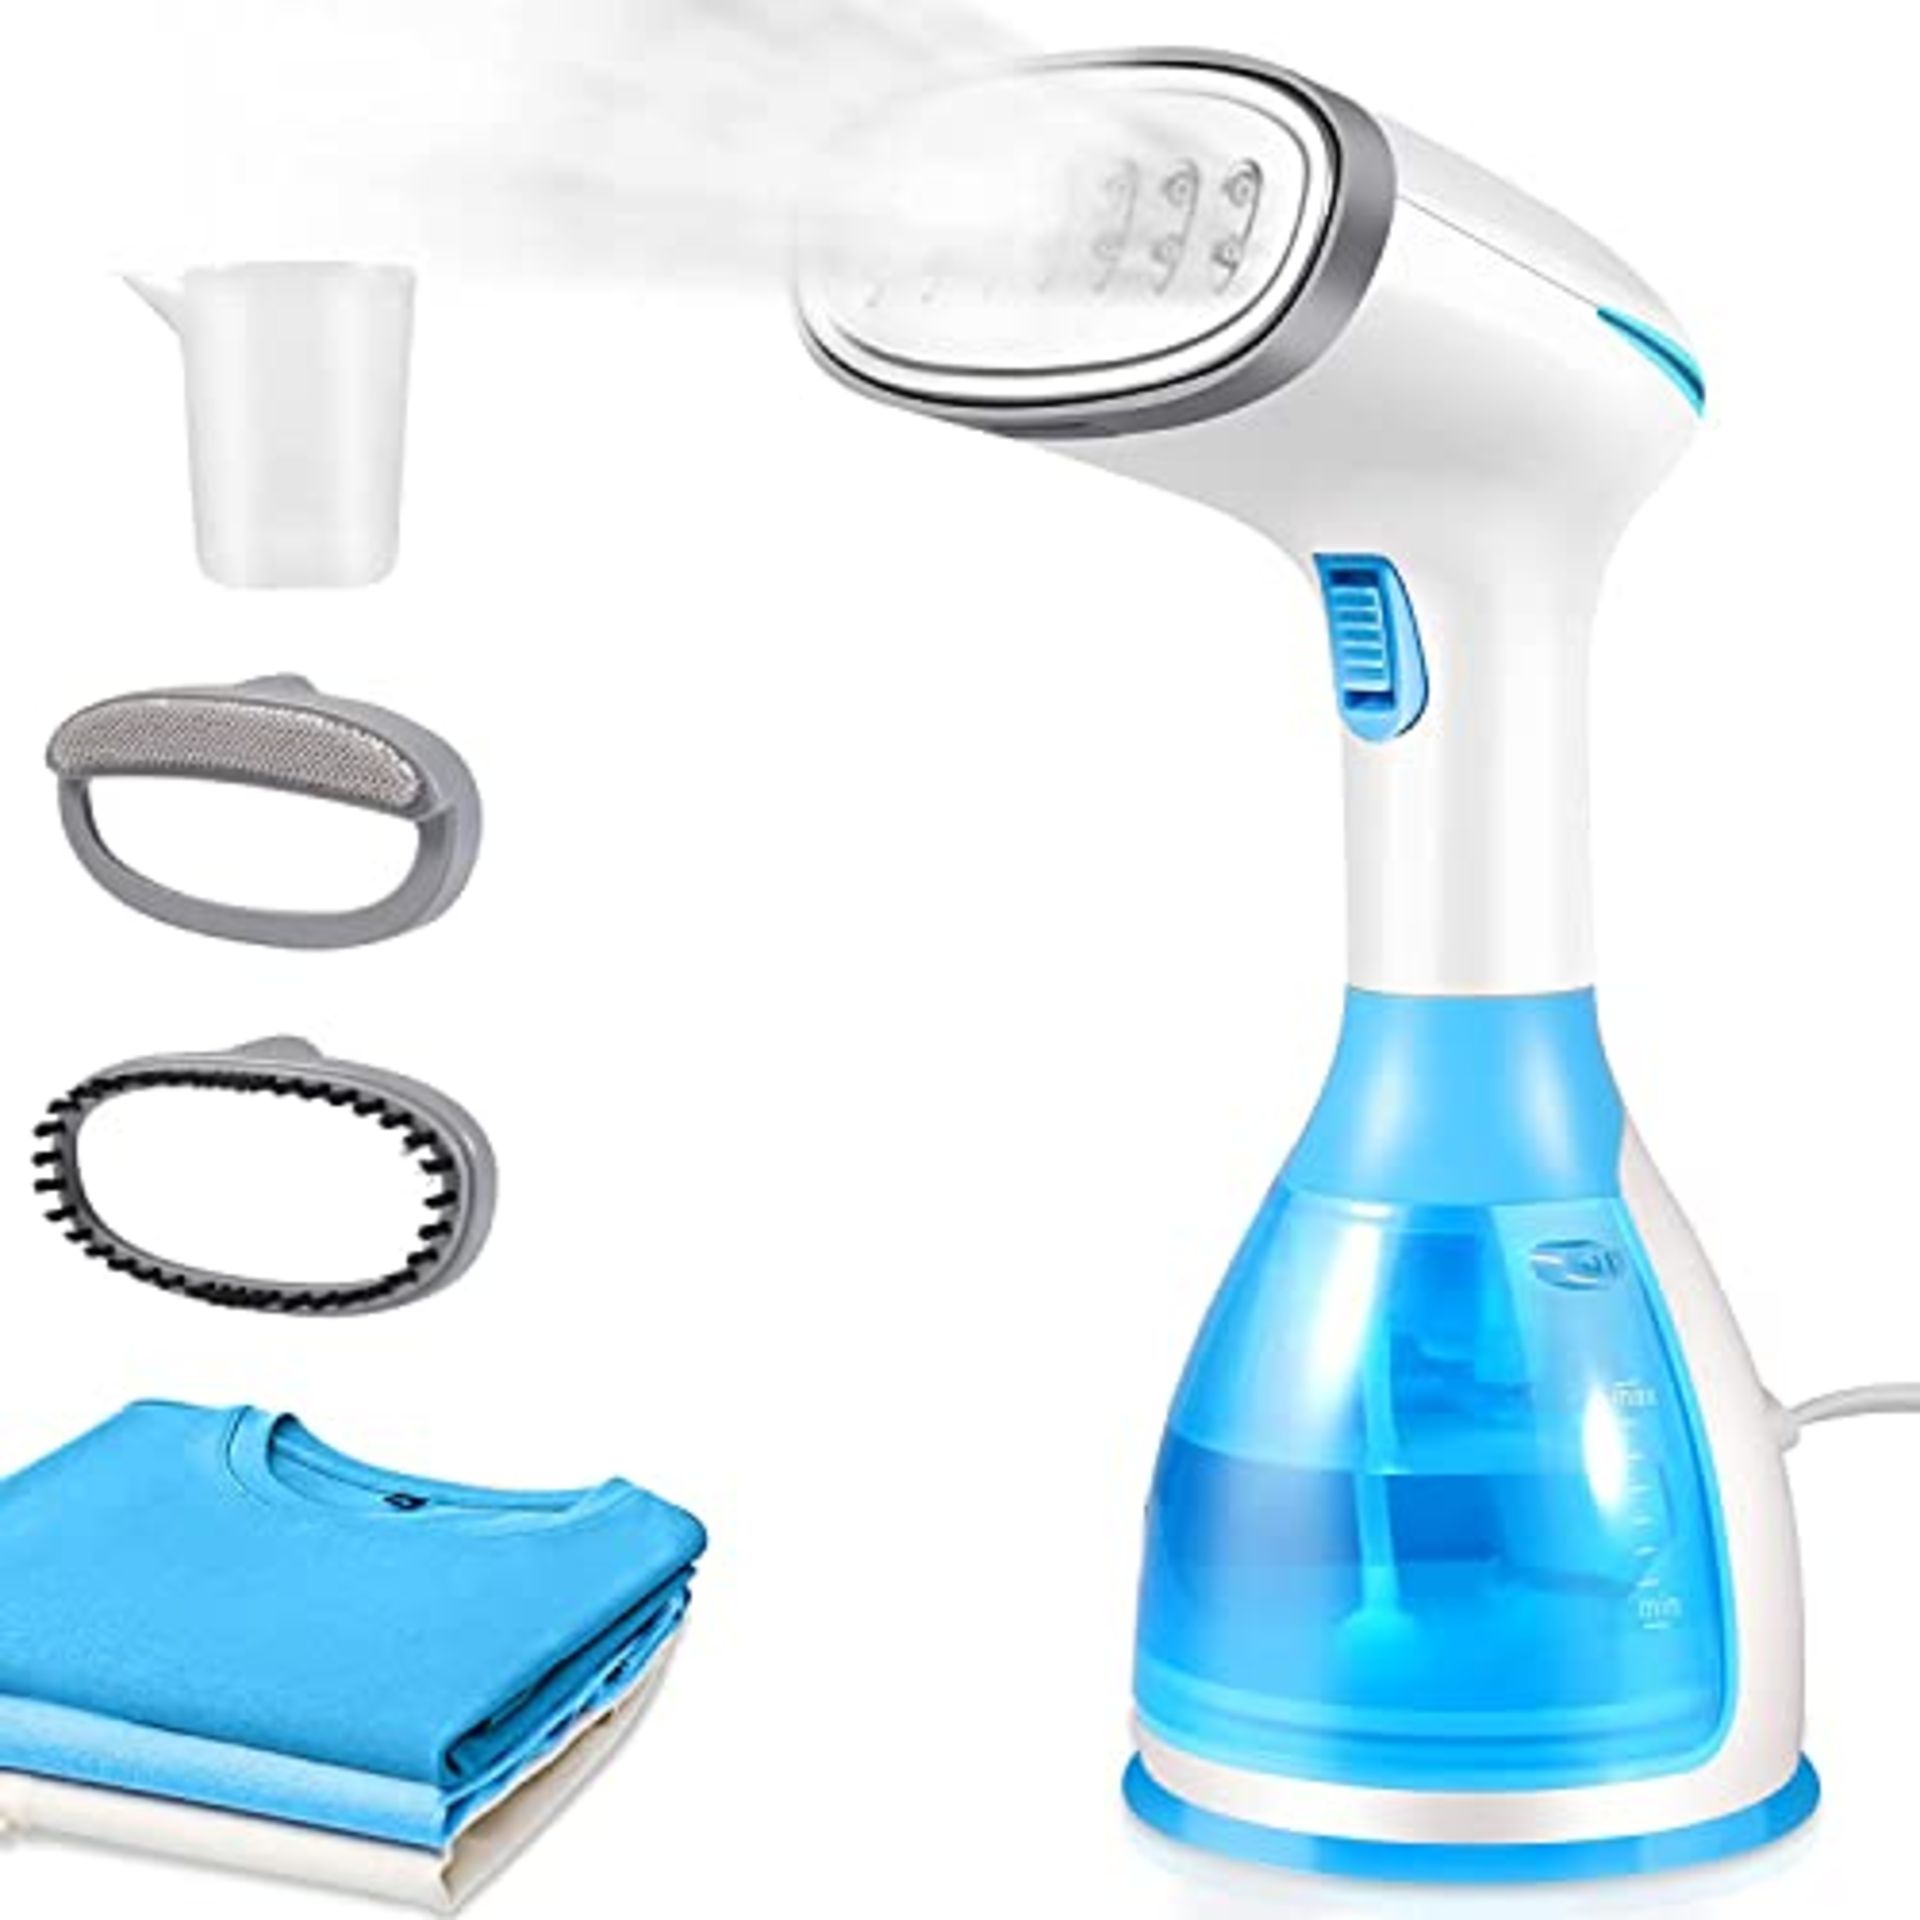 Steamer for Clothes, 15s Heat up Handheld Clothes Steamer with, Portable Garment Steam